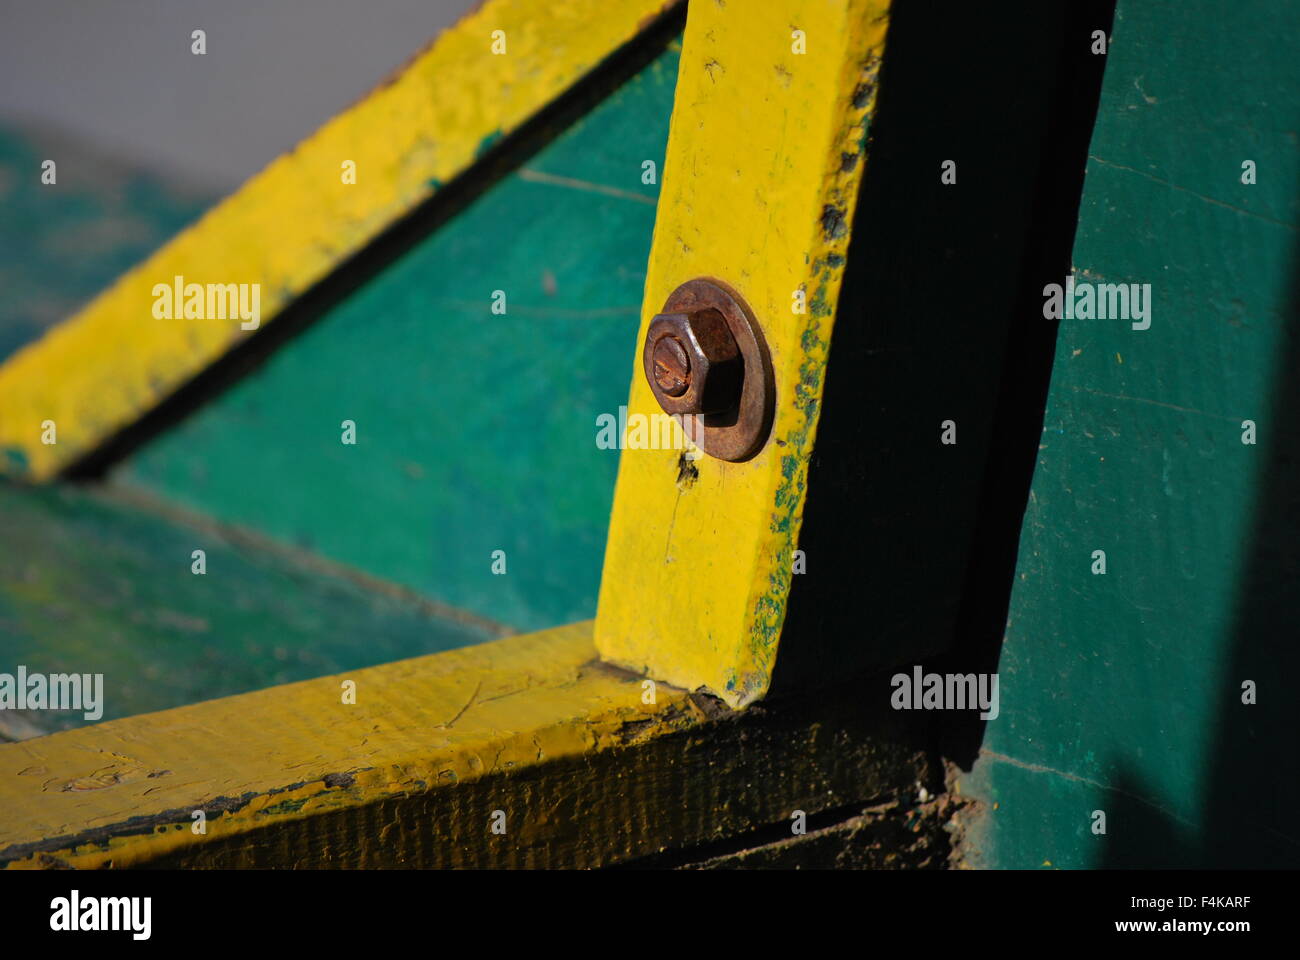 Nut and bolt on deck of small fishing boat on Tonle Sap River, Cambodia Stock Photo